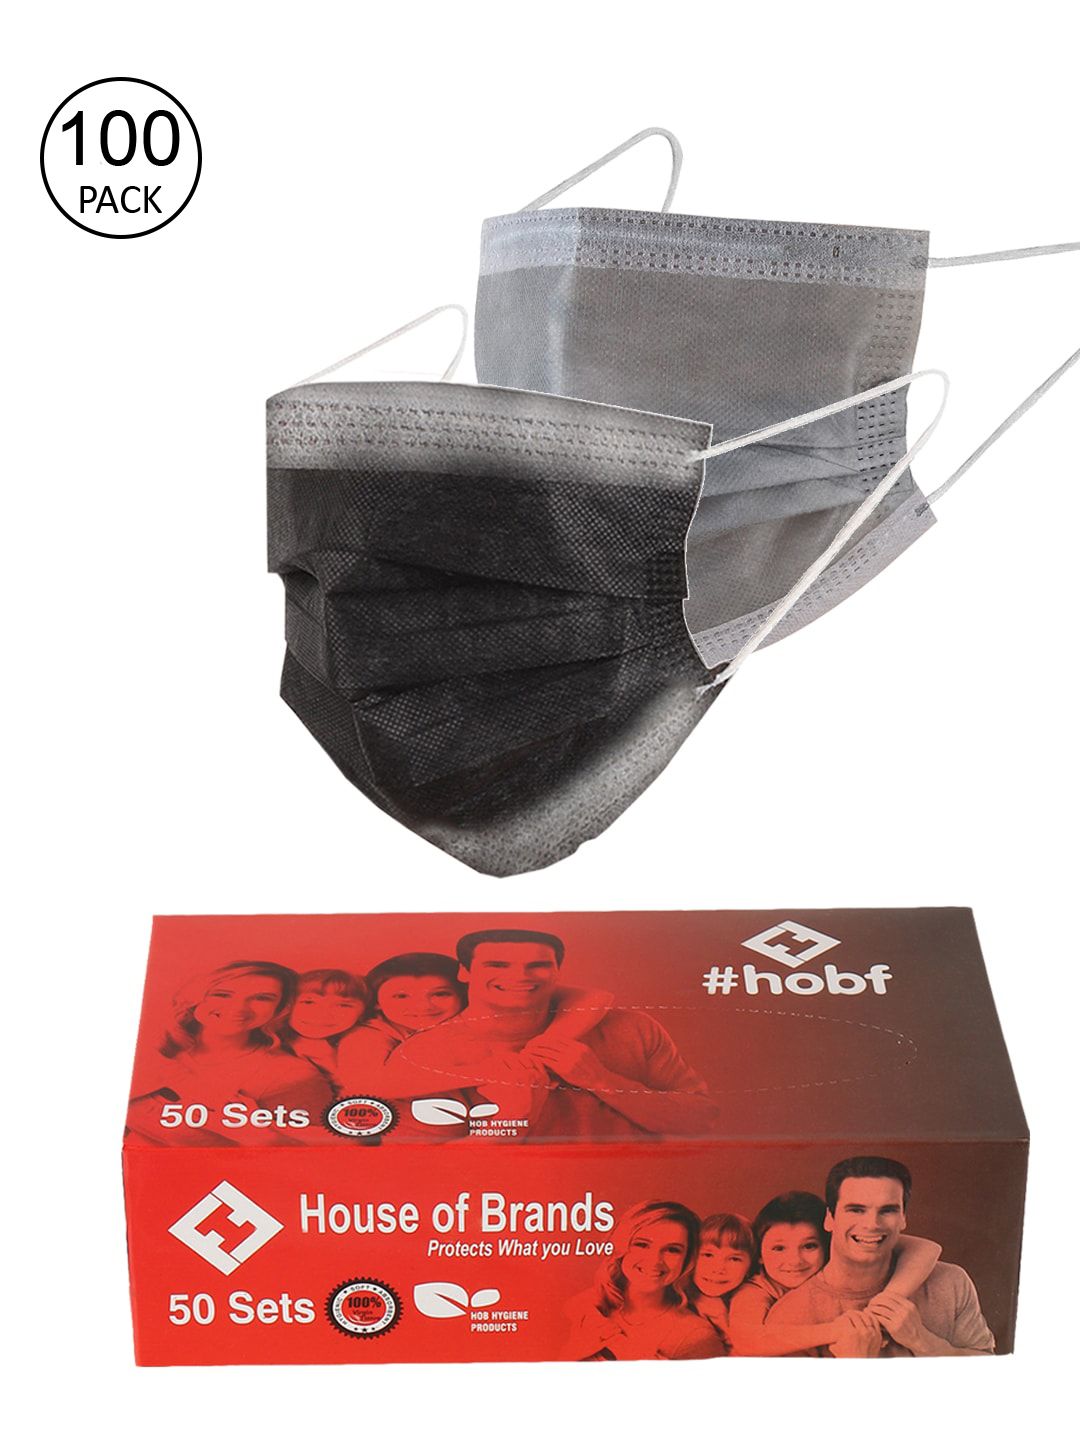 LONDON FASHION hob Unisex Pack Of 100 Black & Grey 3-Ply Anti-Pollution Surgical Face Mask Price in India